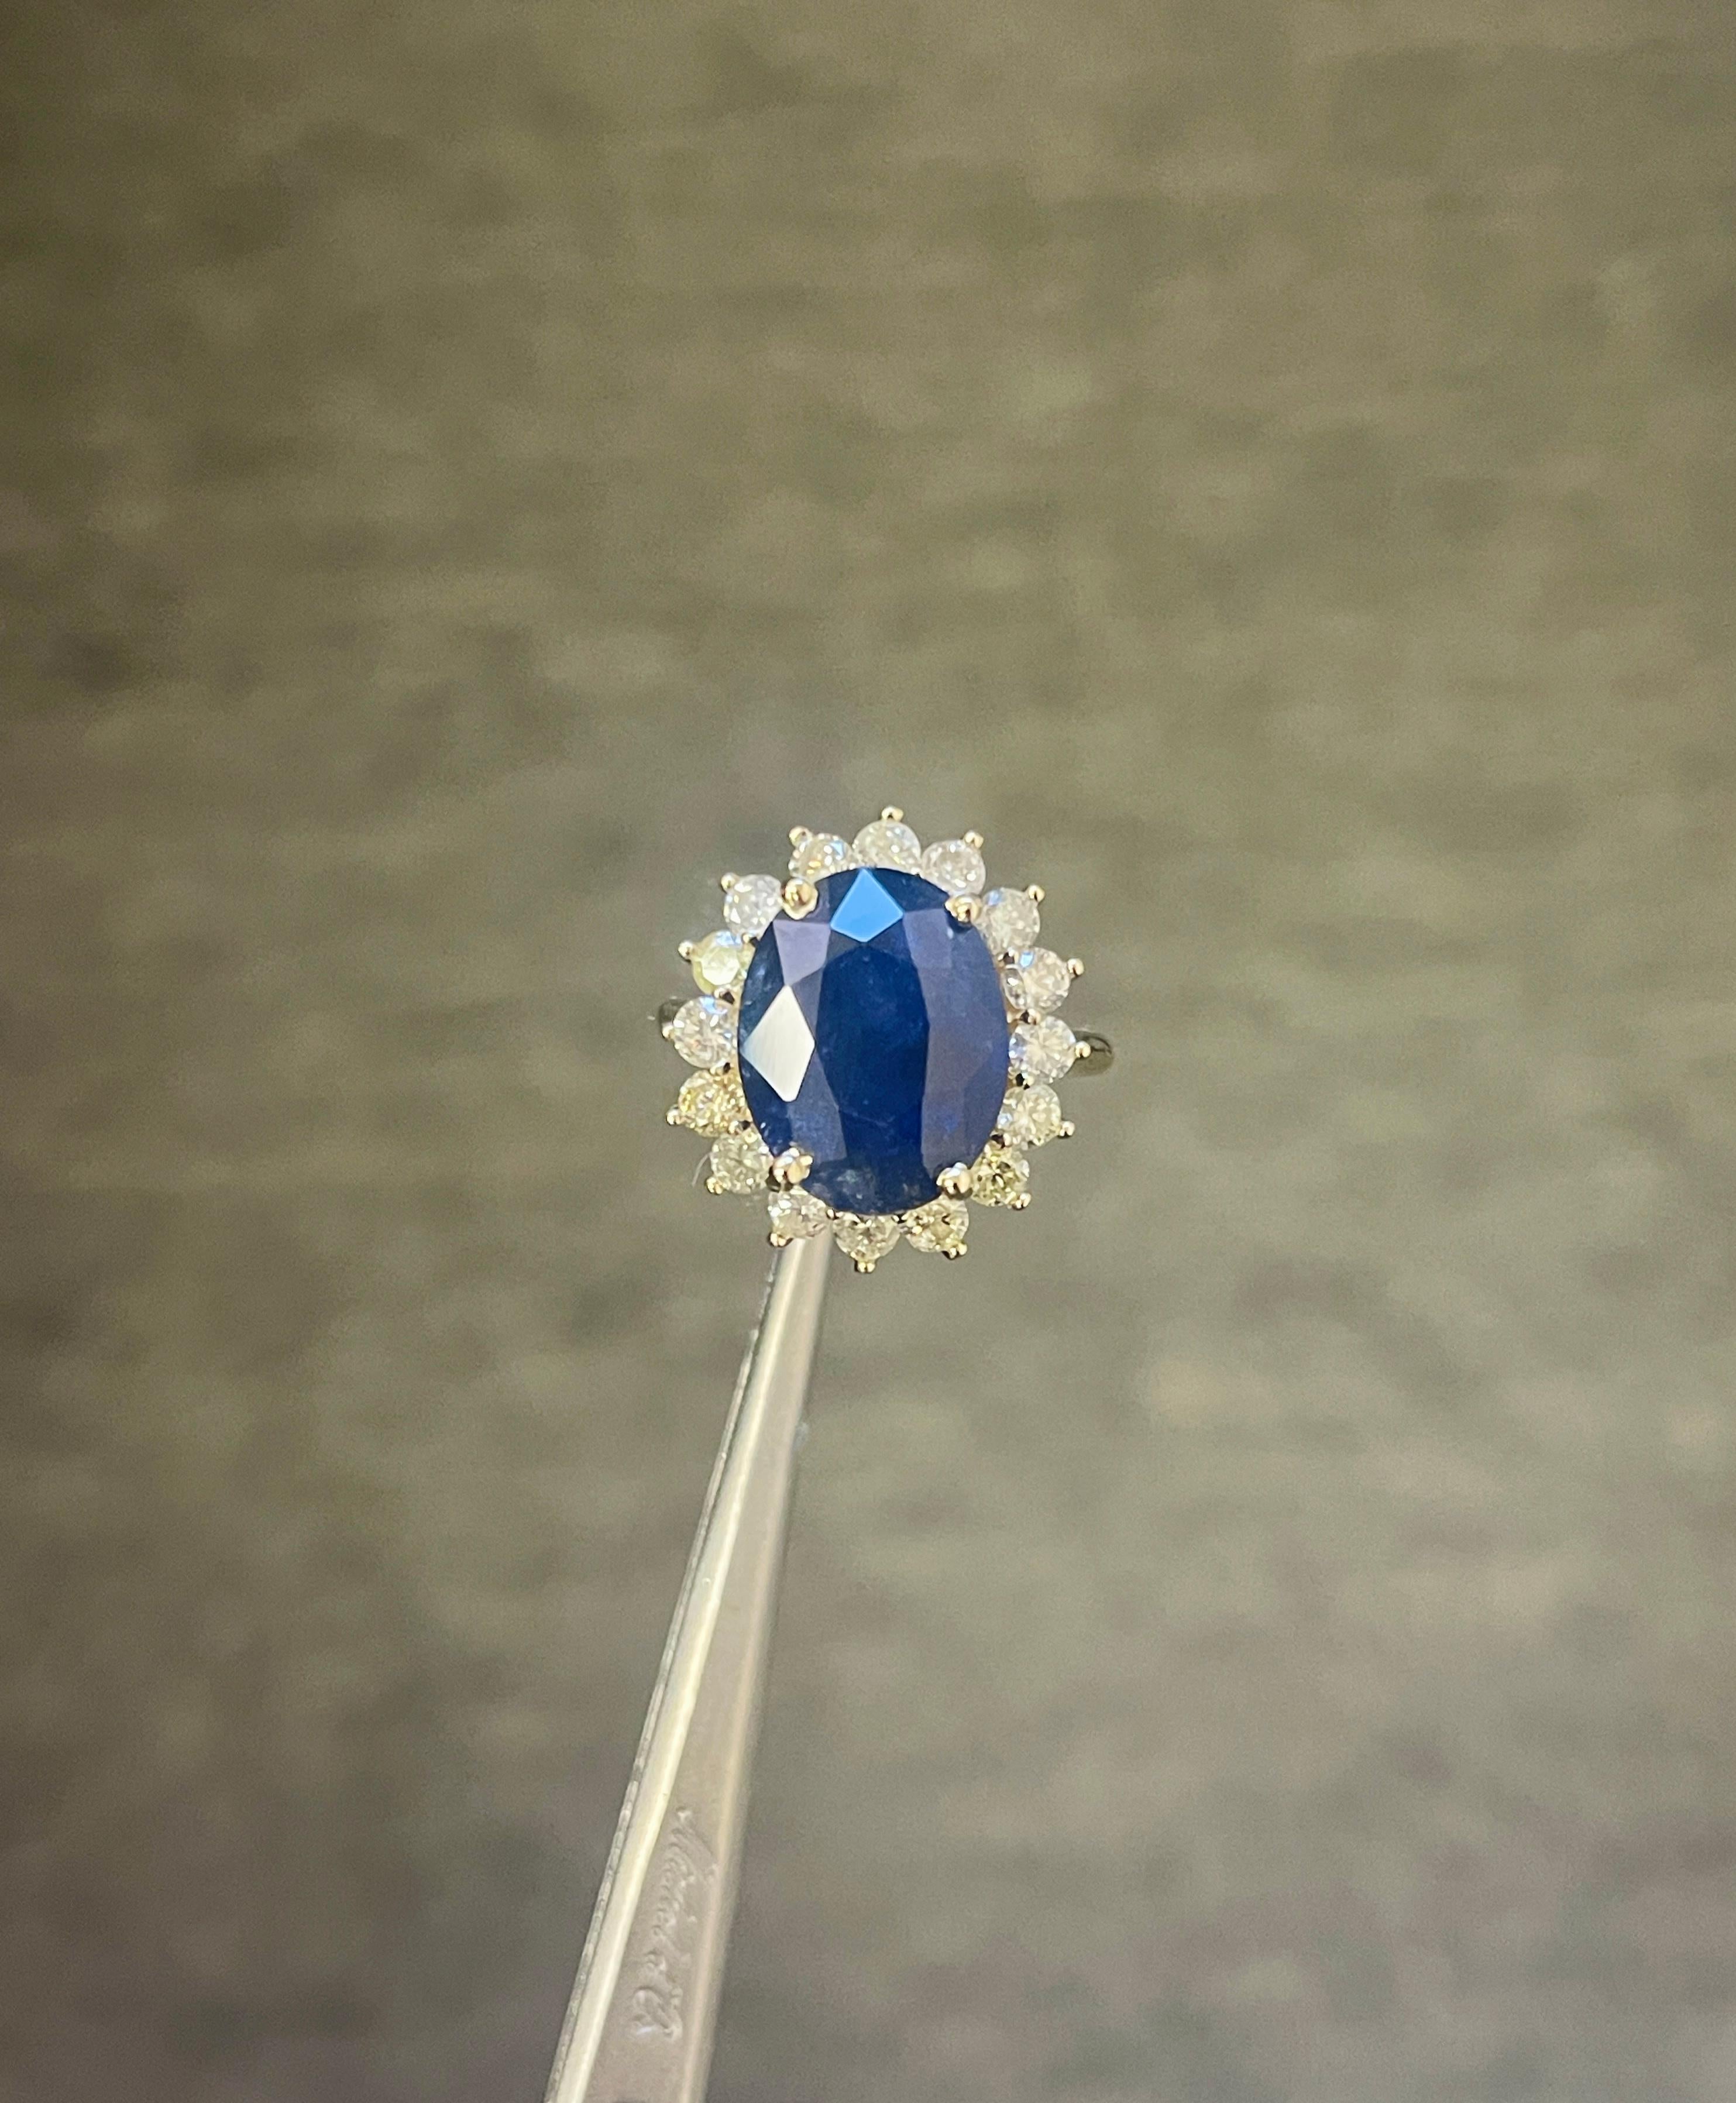 8.71 Carat Intense Blue Oval Cut Natural Sapphire 14K Yellow Gold Diamond Ring For Sale 2